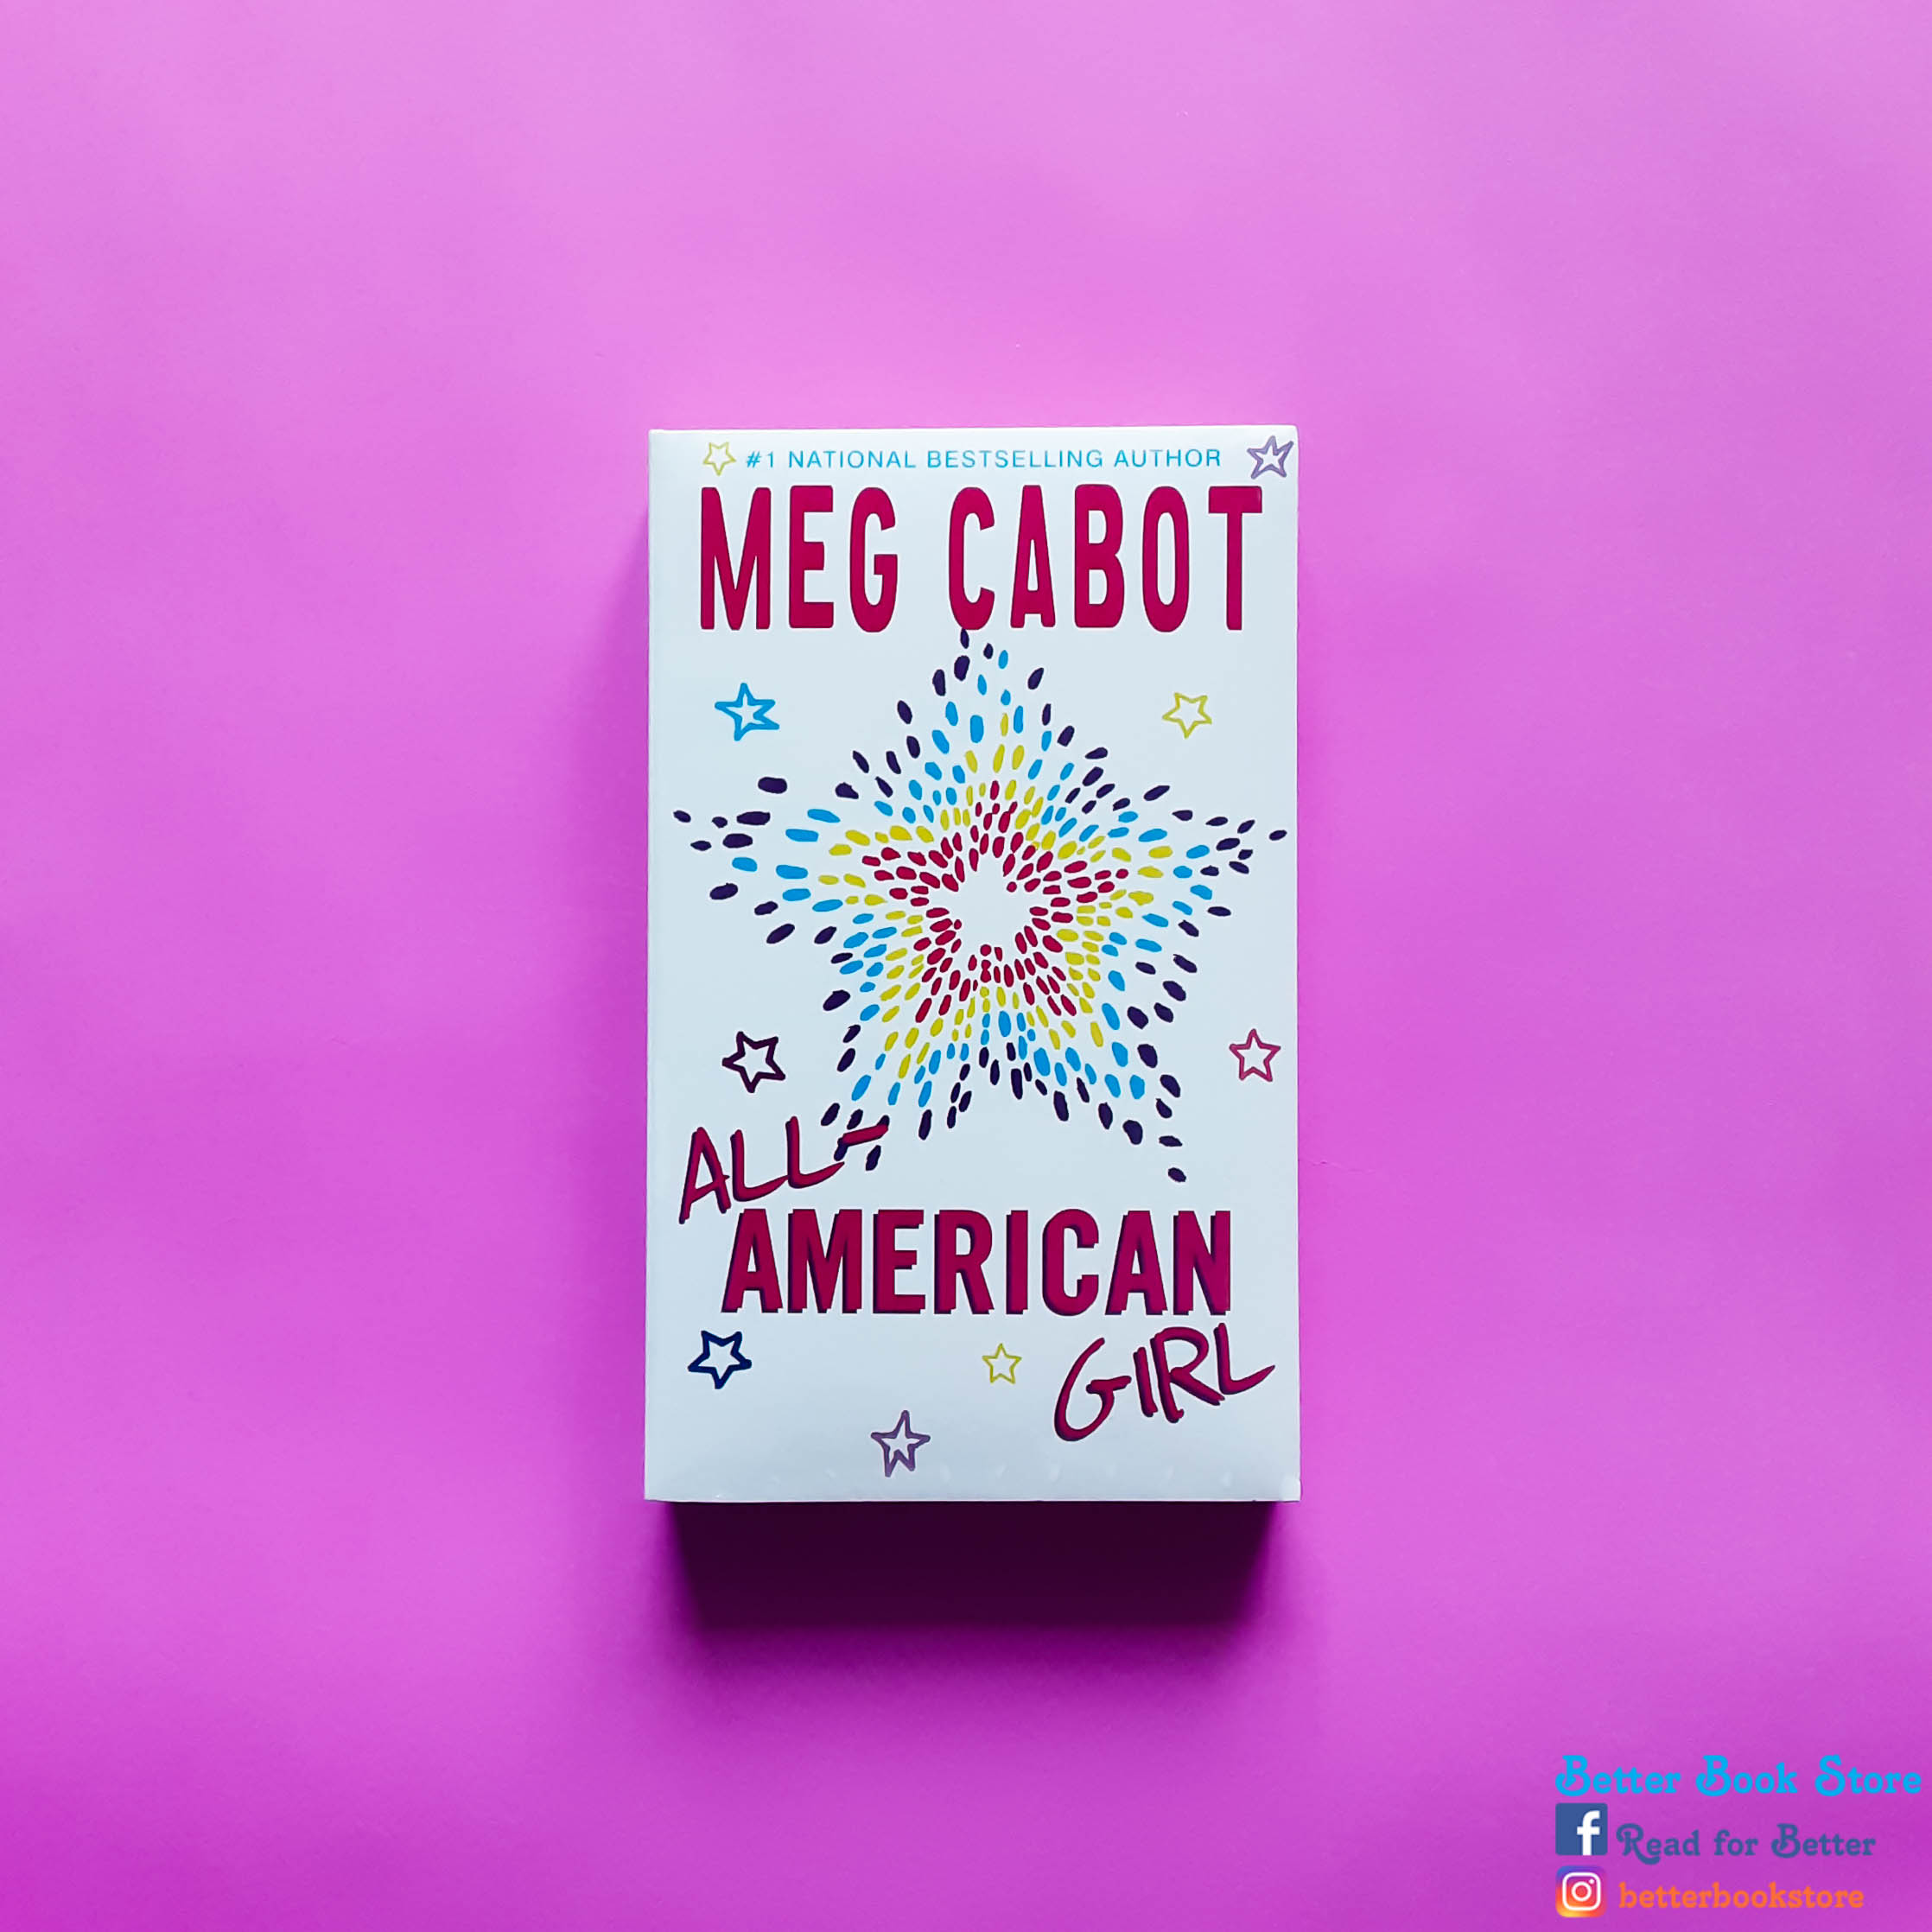 All-American Girl 🇺🇲 by Meg Cabot